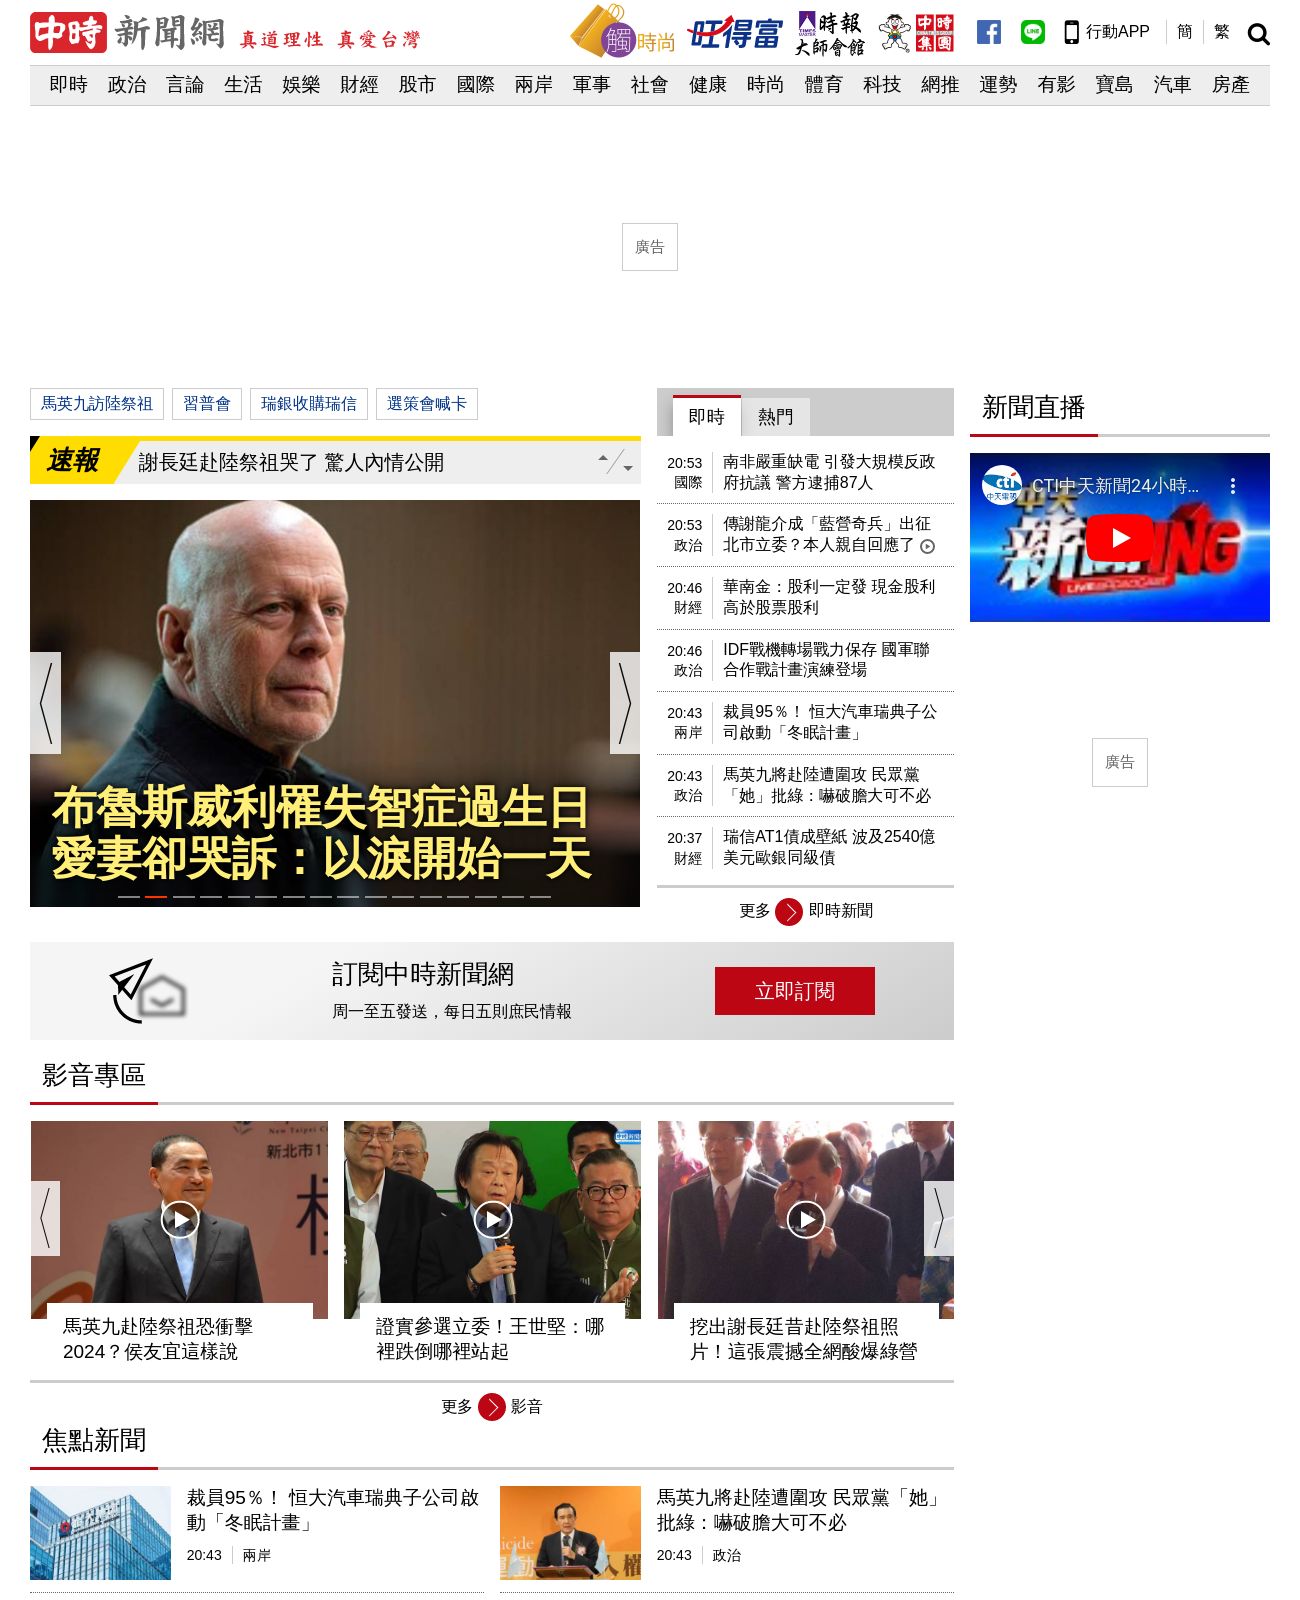 China Times at 2023-03-20 20:59:43+08:00 local time